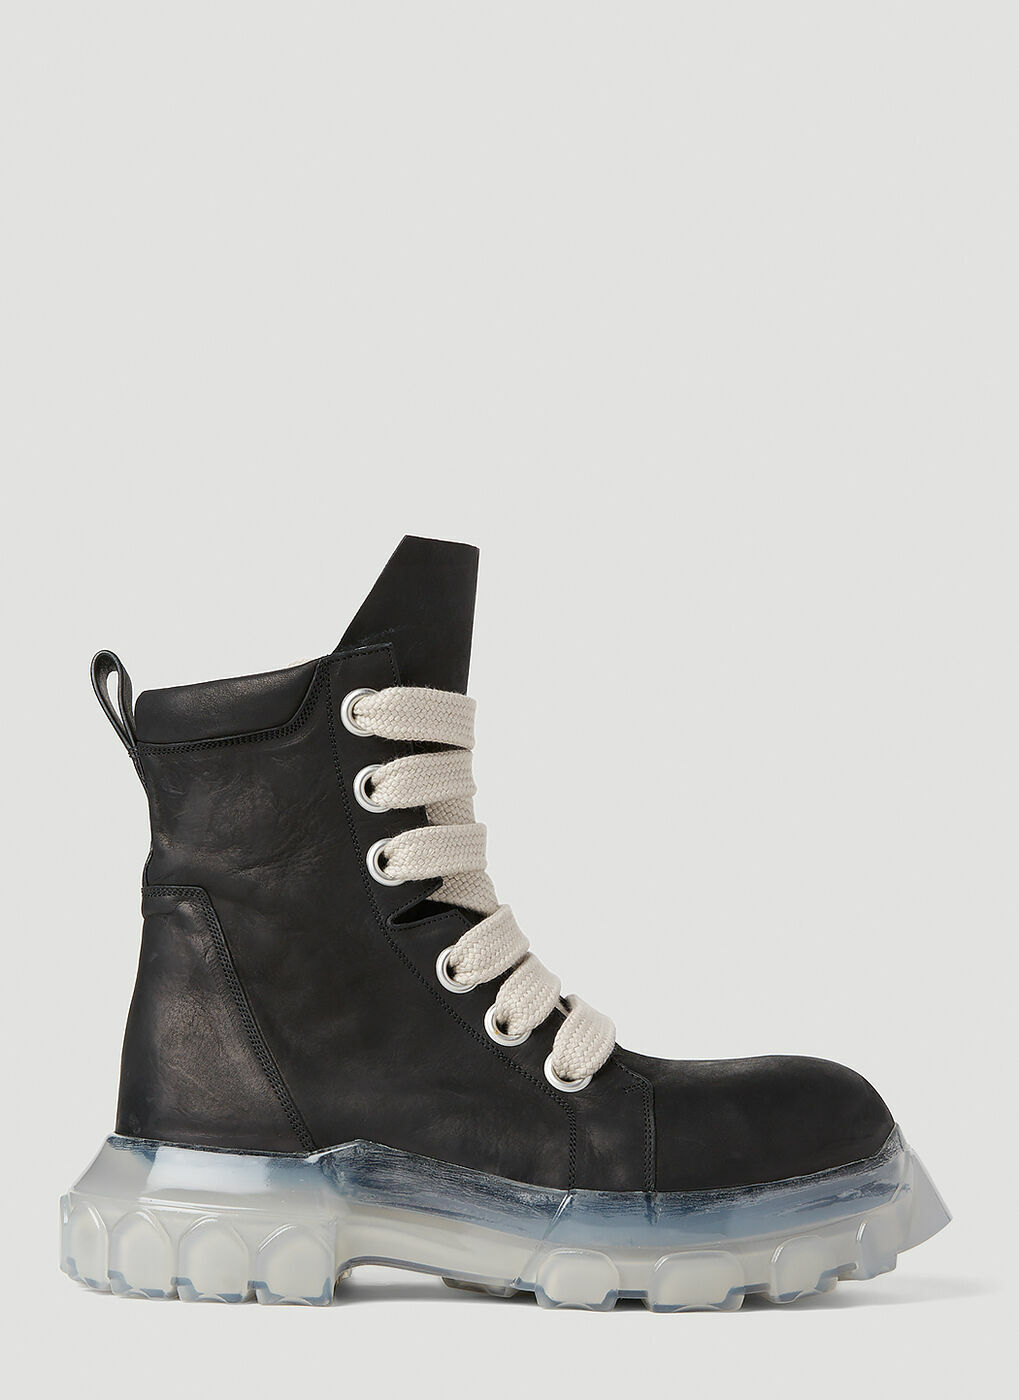 Rick Owens - Bozo Tractor Boots in Black Rick Owens